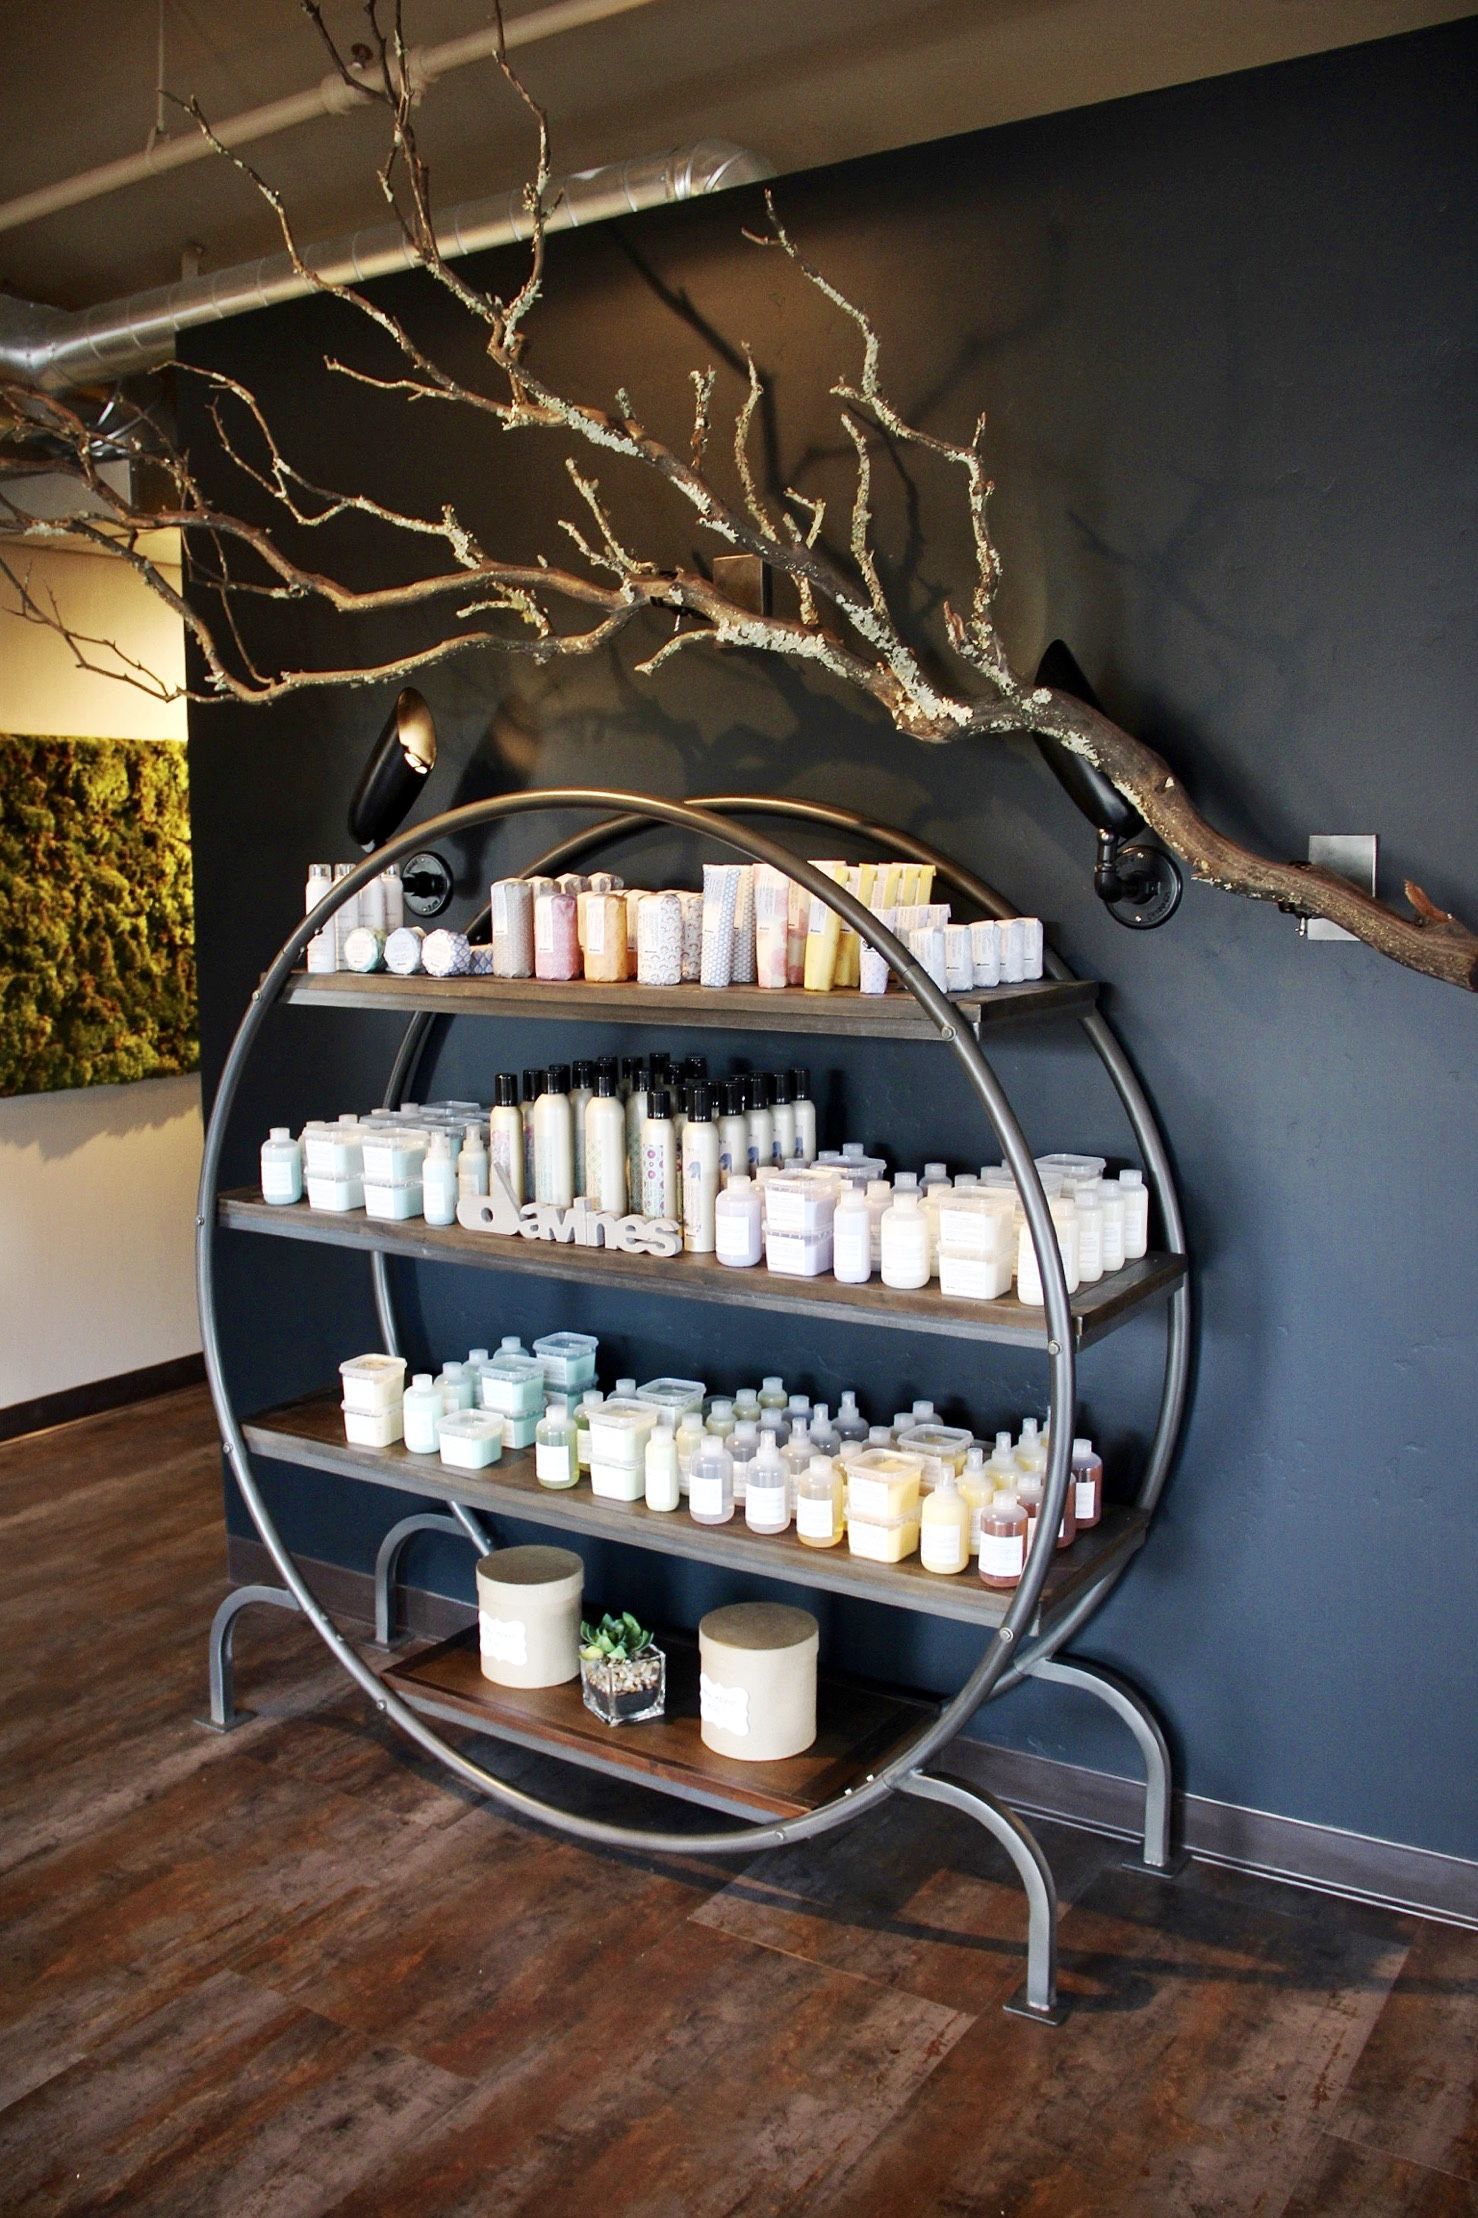 Our Davines products on display!